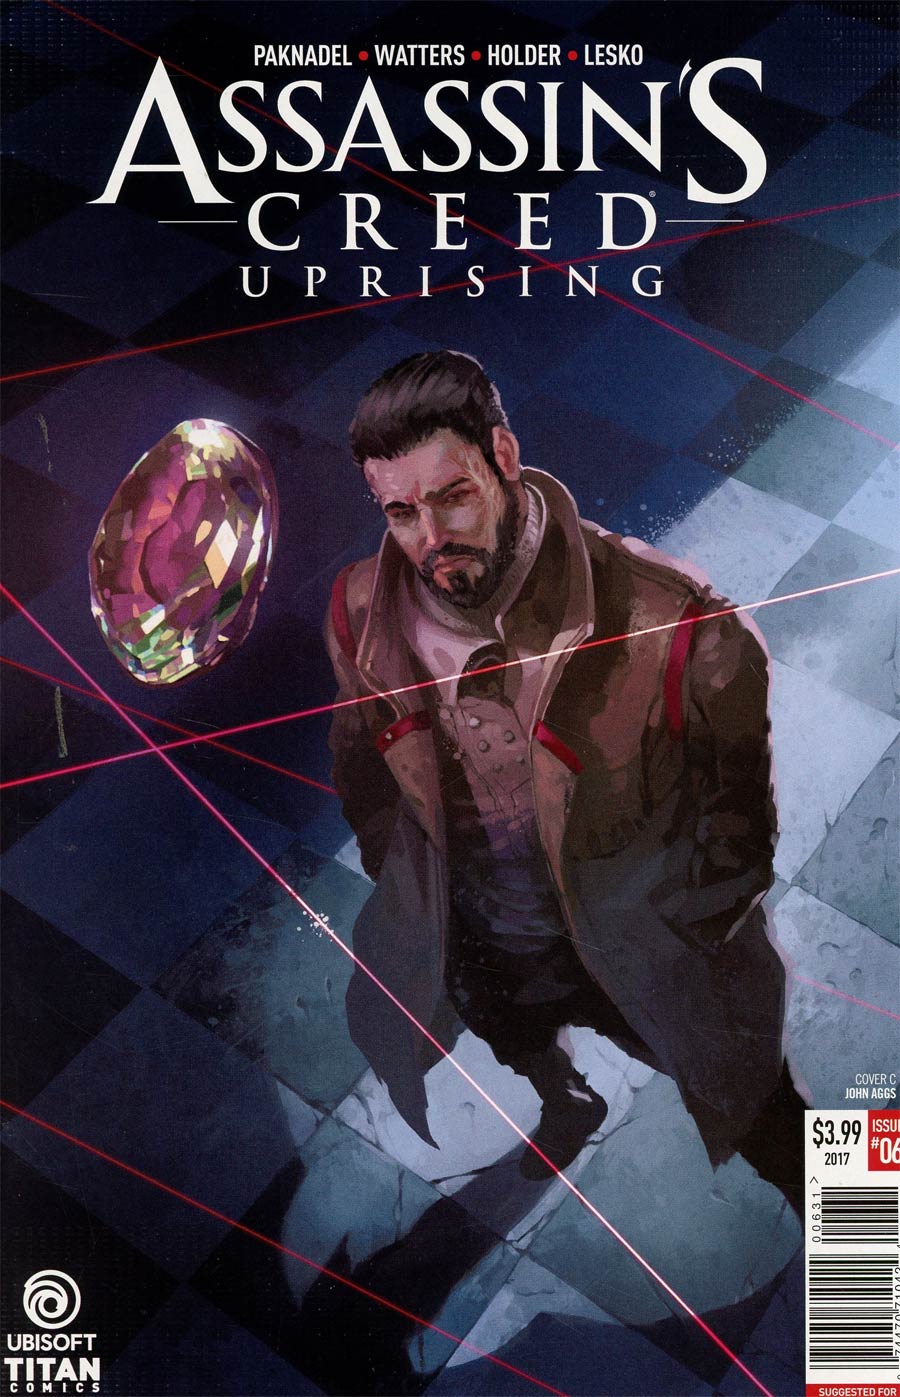 Assassins Creed Uprising #6 Cover C Variant John Aggs Cover